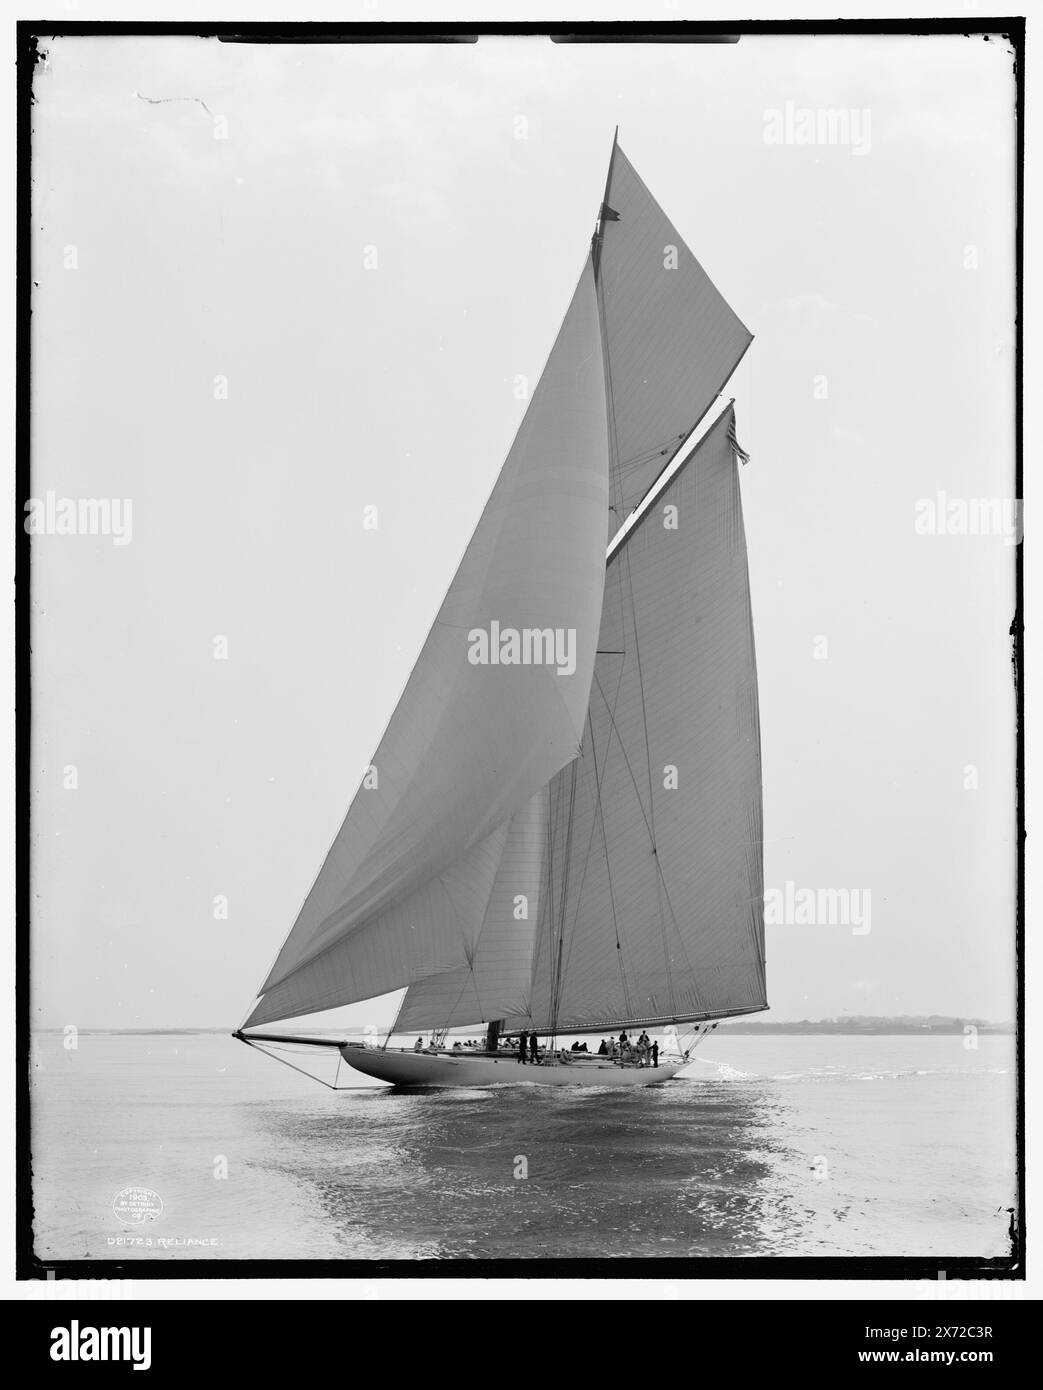 Reliance, Detroit Publishing Co. no. 021723., Gift; State Historical Society of Colorado; 1949,  Reliance (Yacht) , America's Cup races. , Yachts. , Regattas. Stock Photo